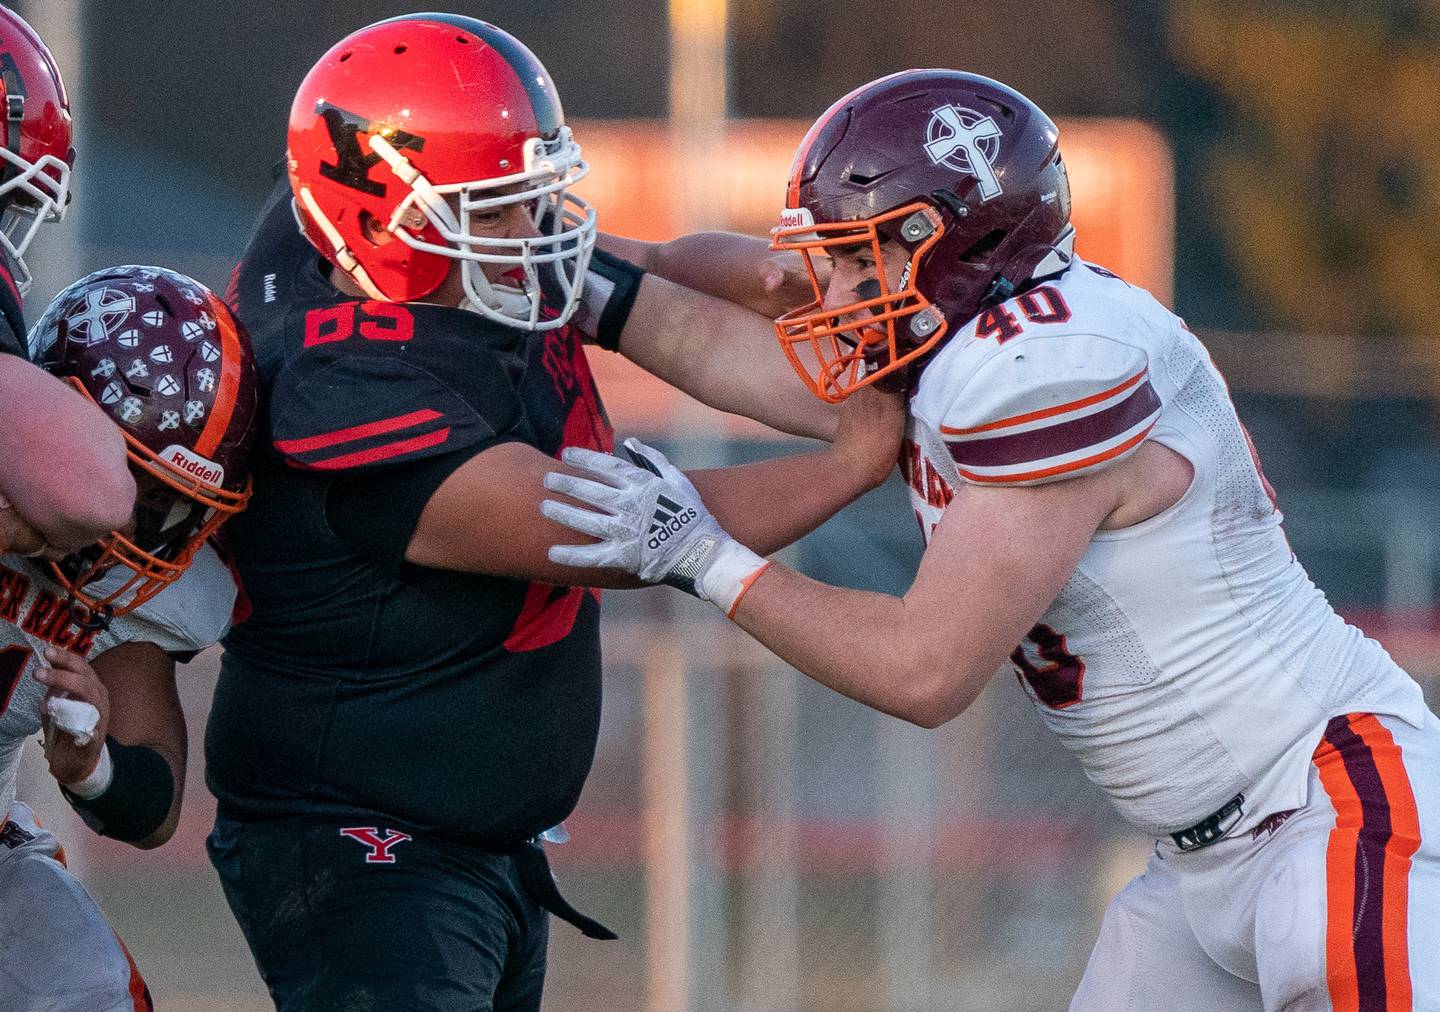 Yorkville's Adrian Alvarez (65) and Brother Rice's James Hogan (40) battle on the line of scrimmage during a a 7A state football playoff game at Yorkville High School on Saturday, Nov. 6, 2021.